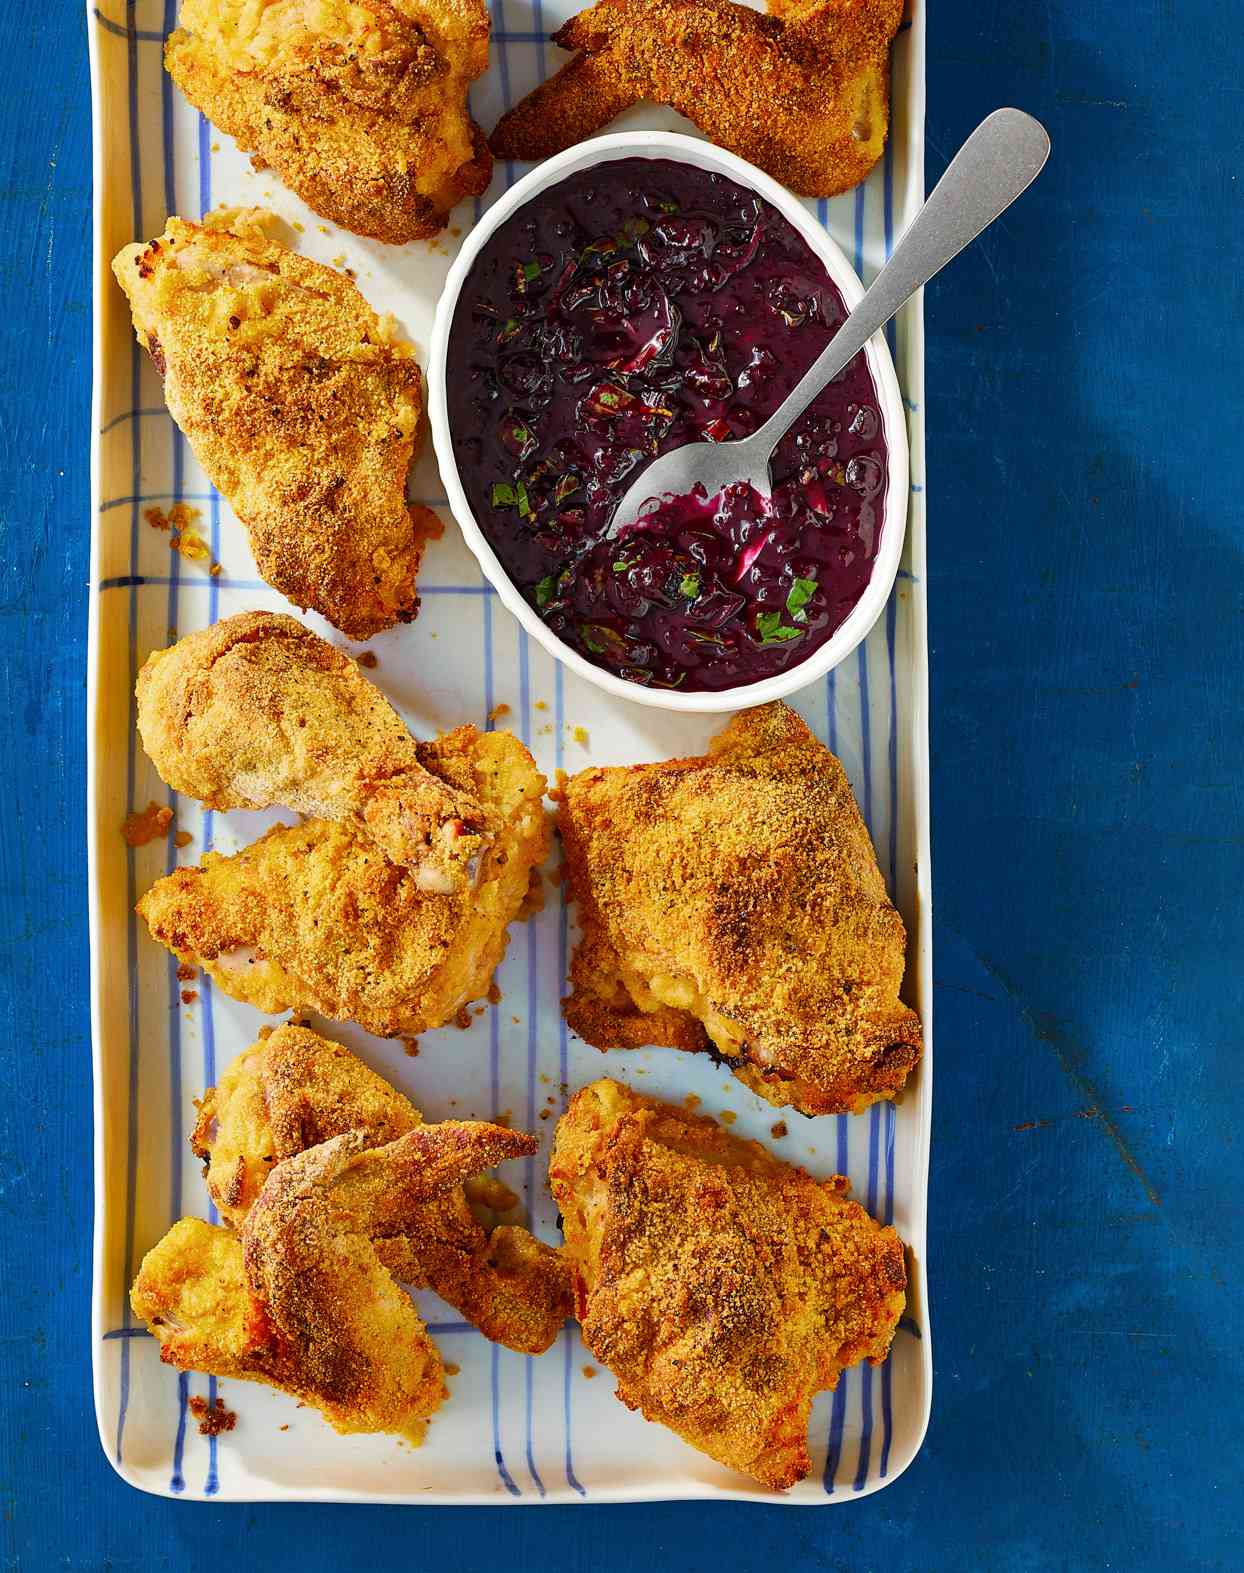 Cornmeal-Crusted Picnic Chicken with Blueberry Mostarda